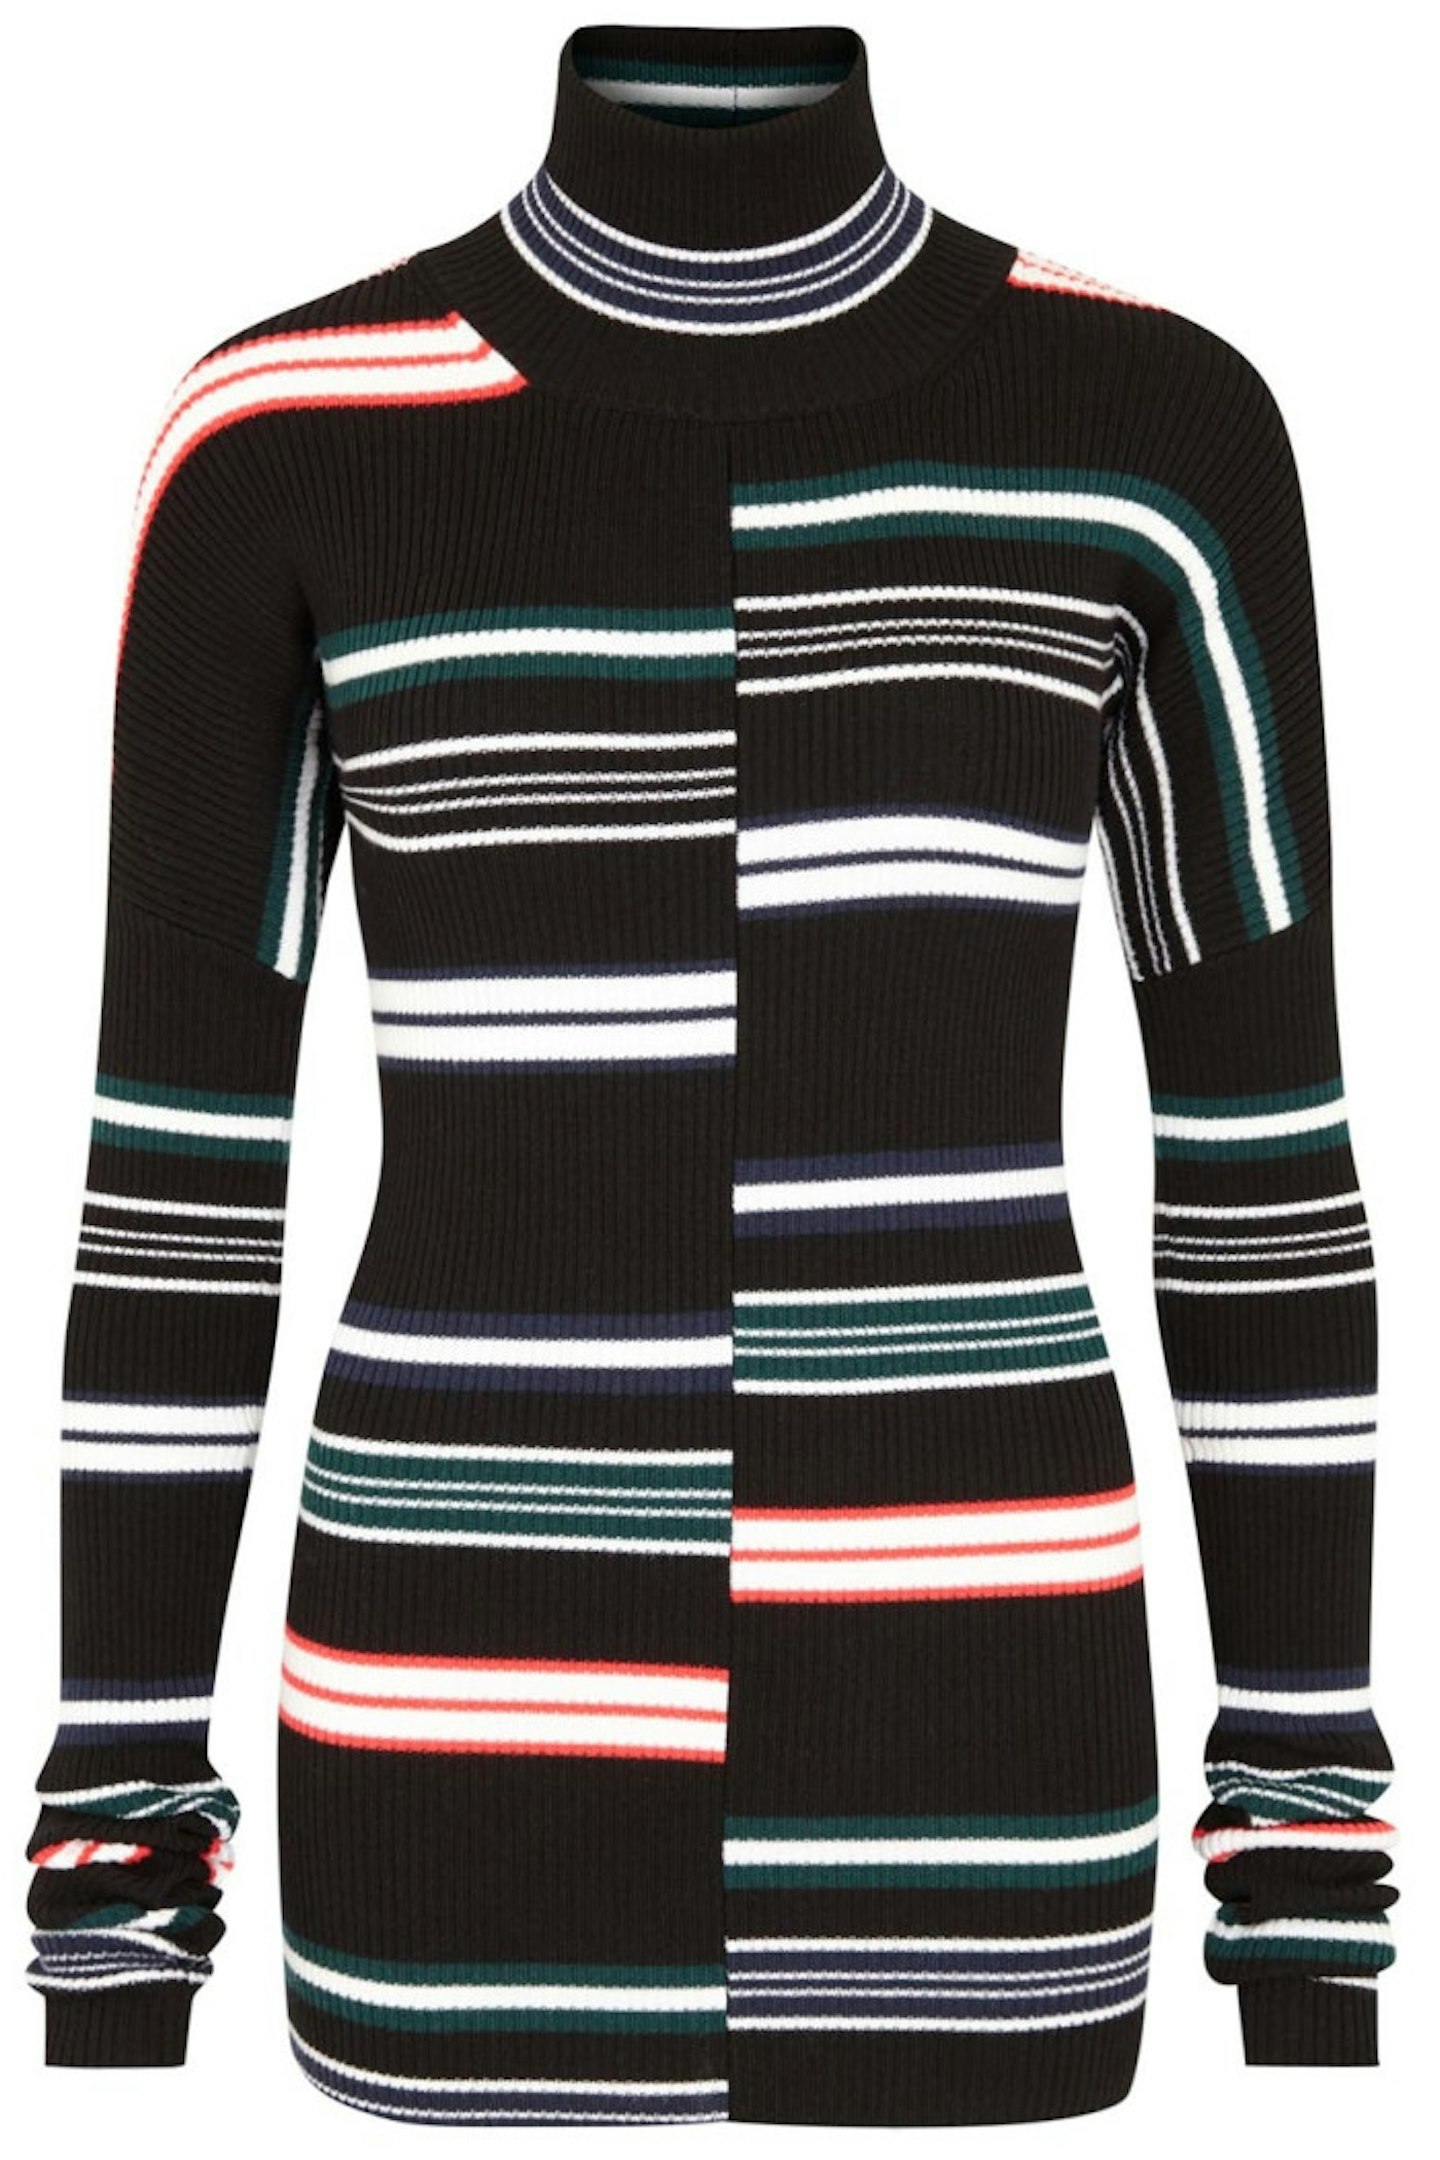 The striped roll neck